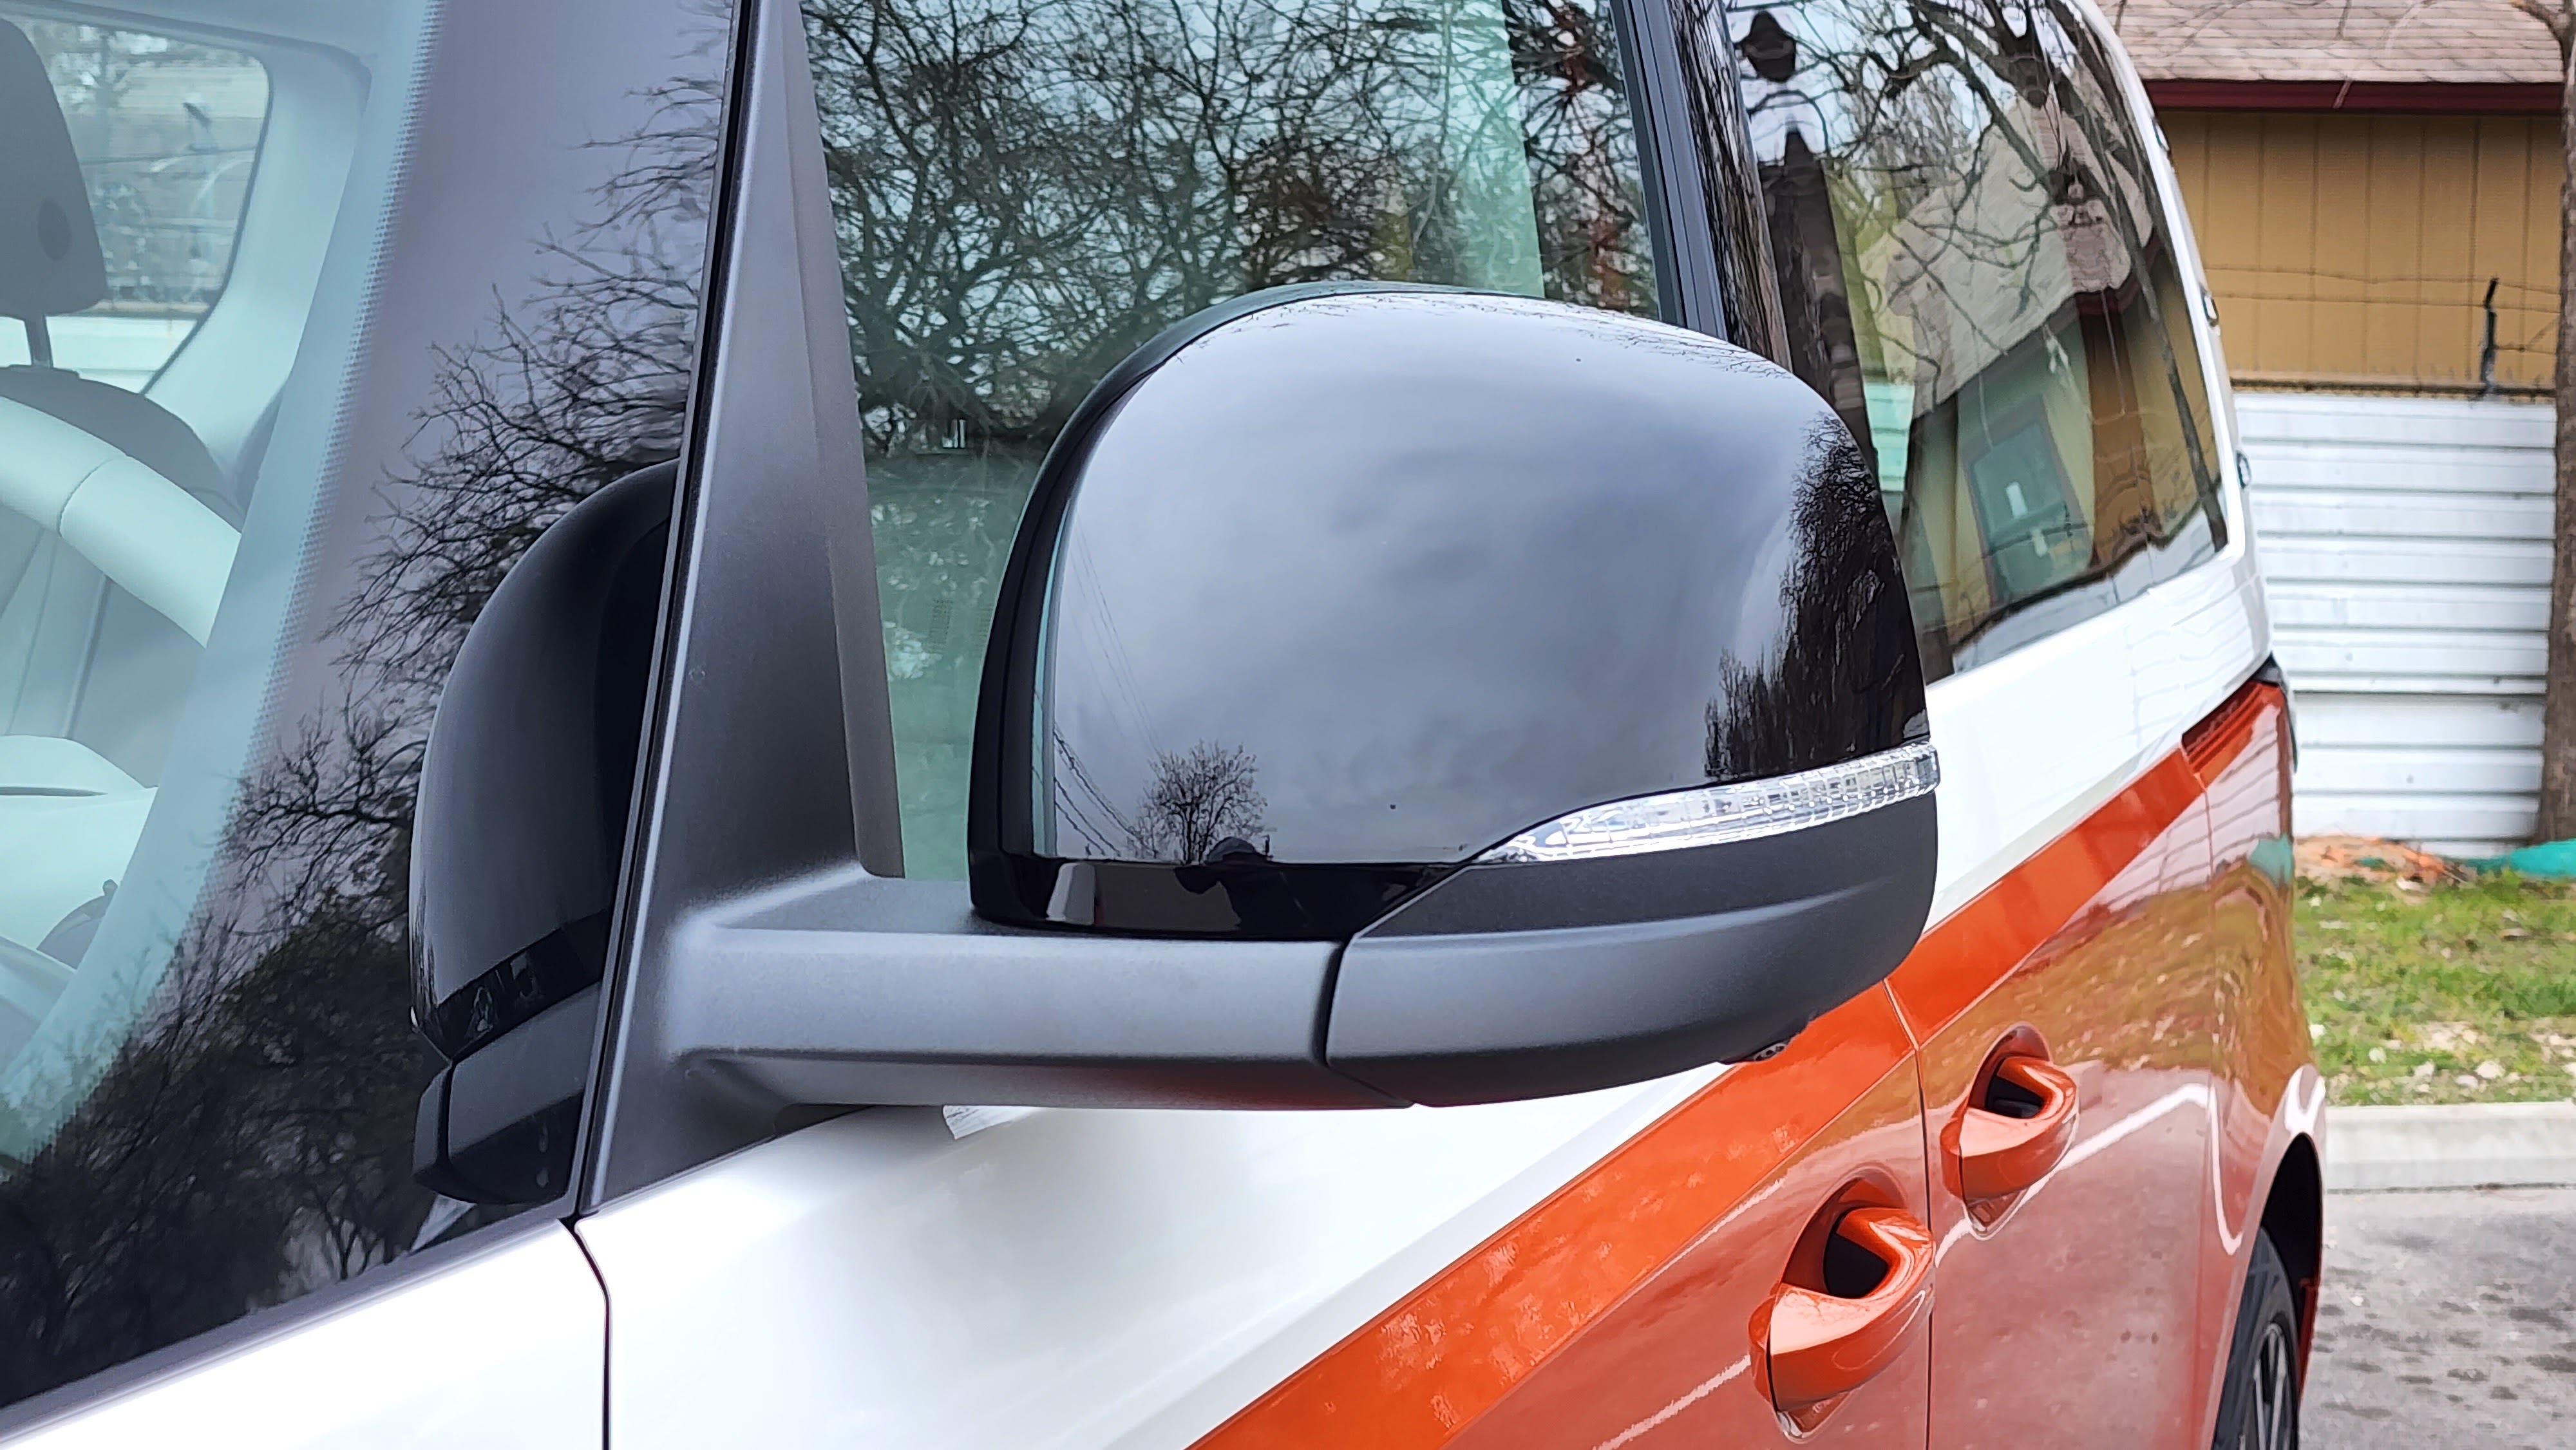 Close-up of the rear of a side mirror